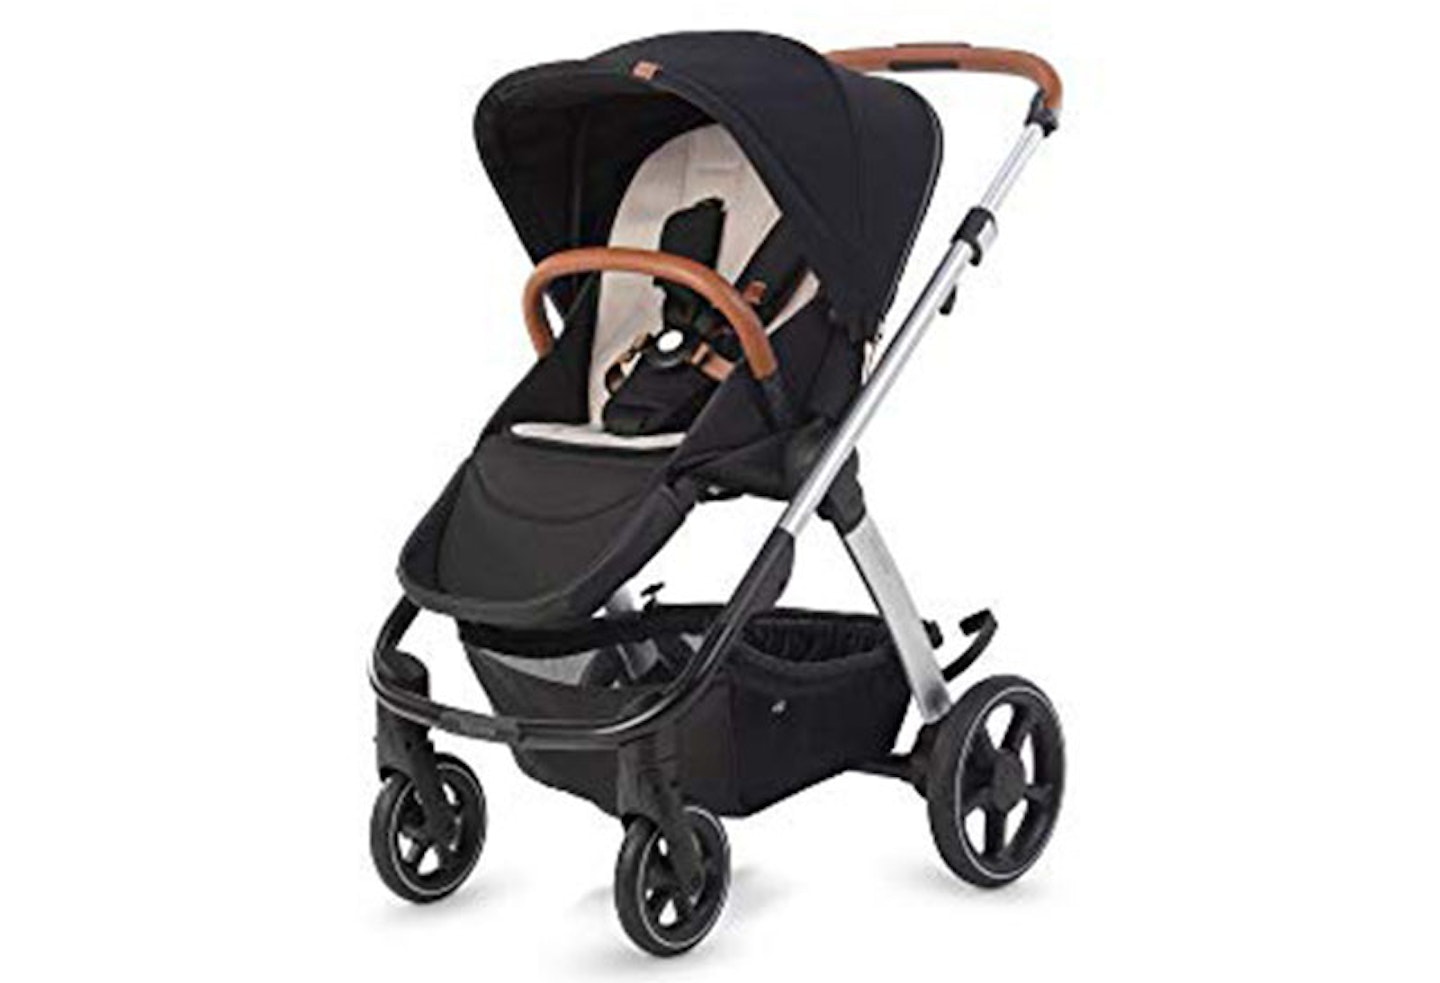 Micralite GetGo travel system review